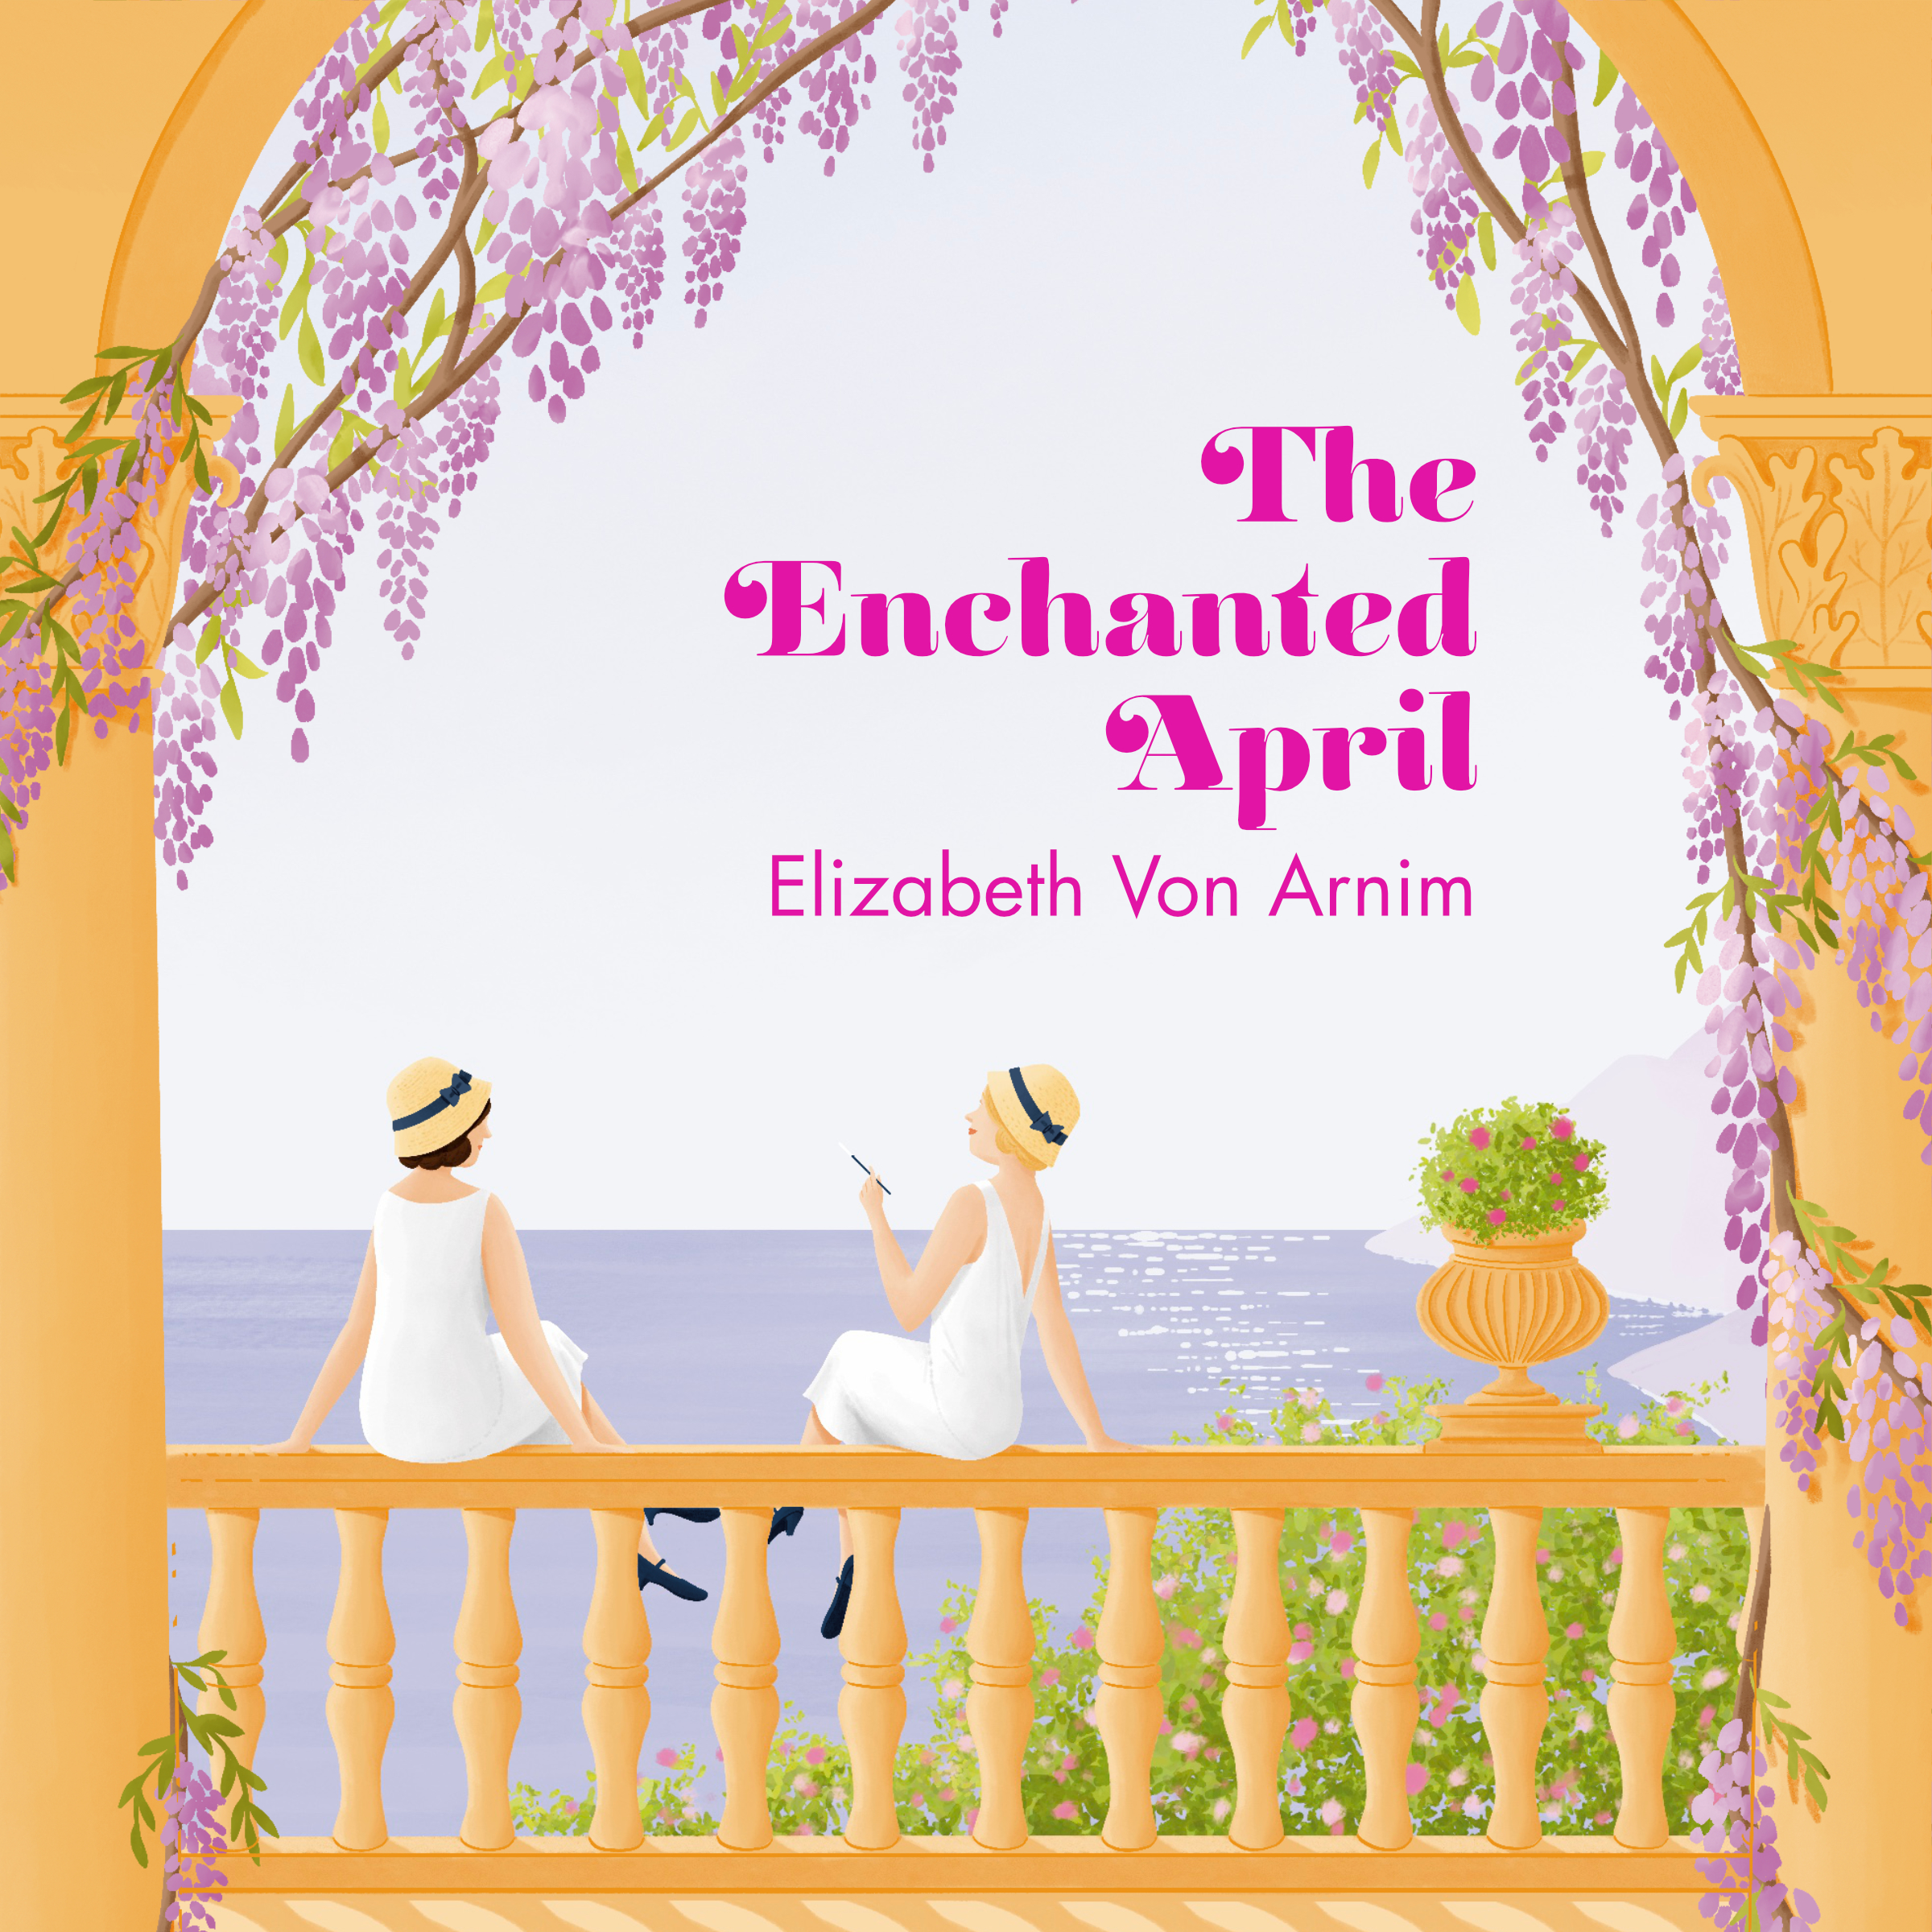 Audiobook format for The Enchanted April book cover illustration